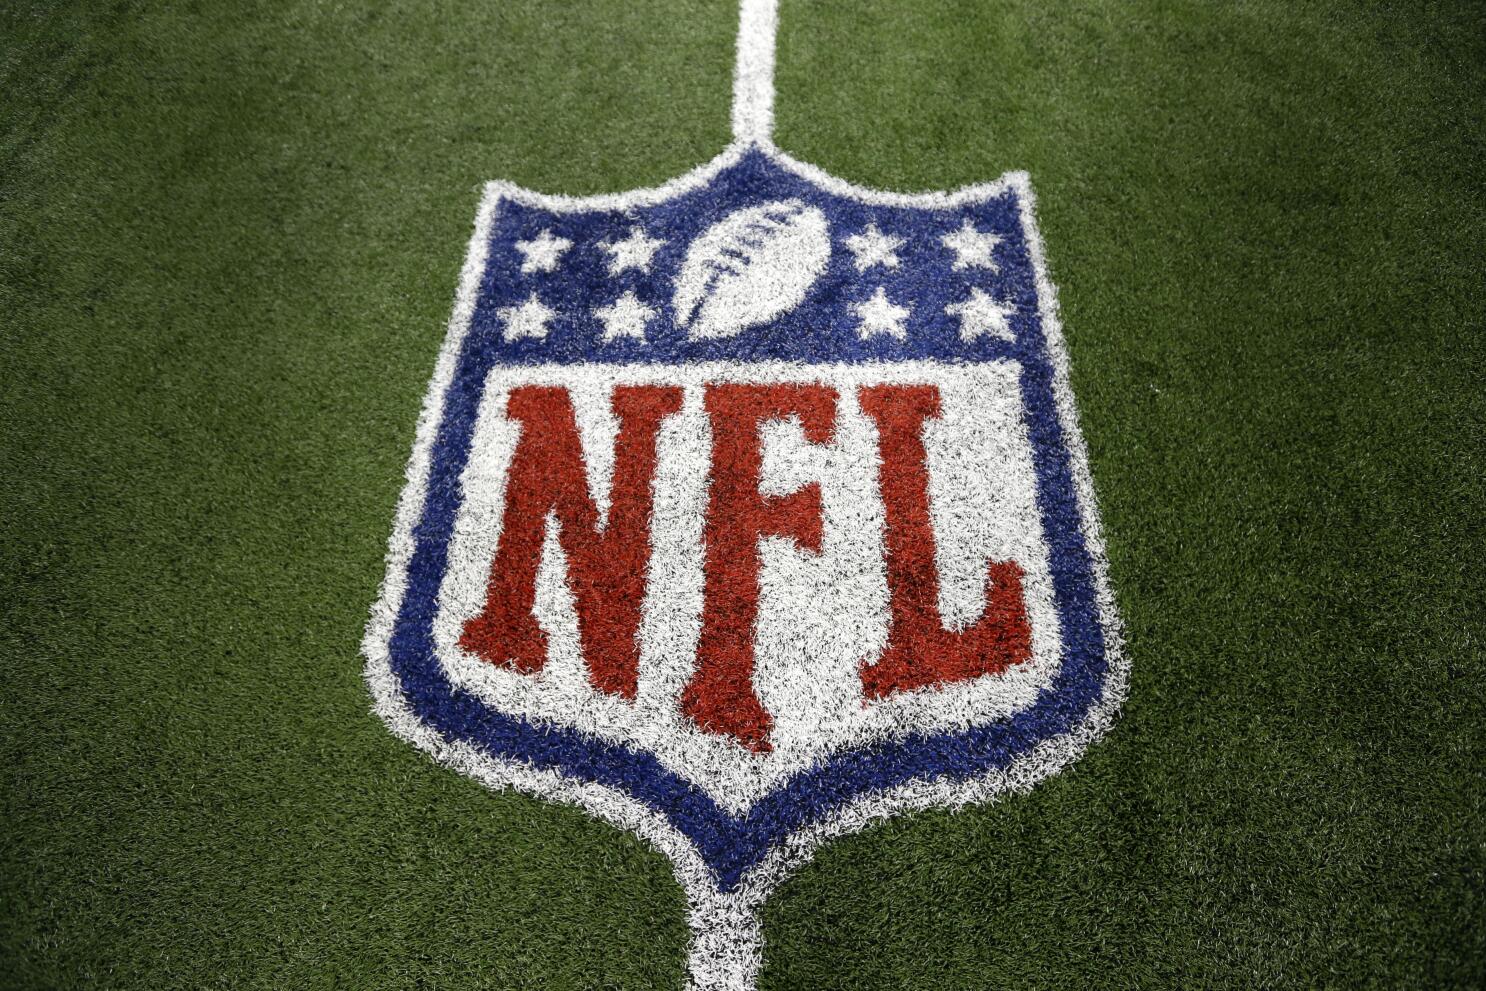 Thursday Night Football Is Getting Lit Up By NFL Fans For Fake Ball Video